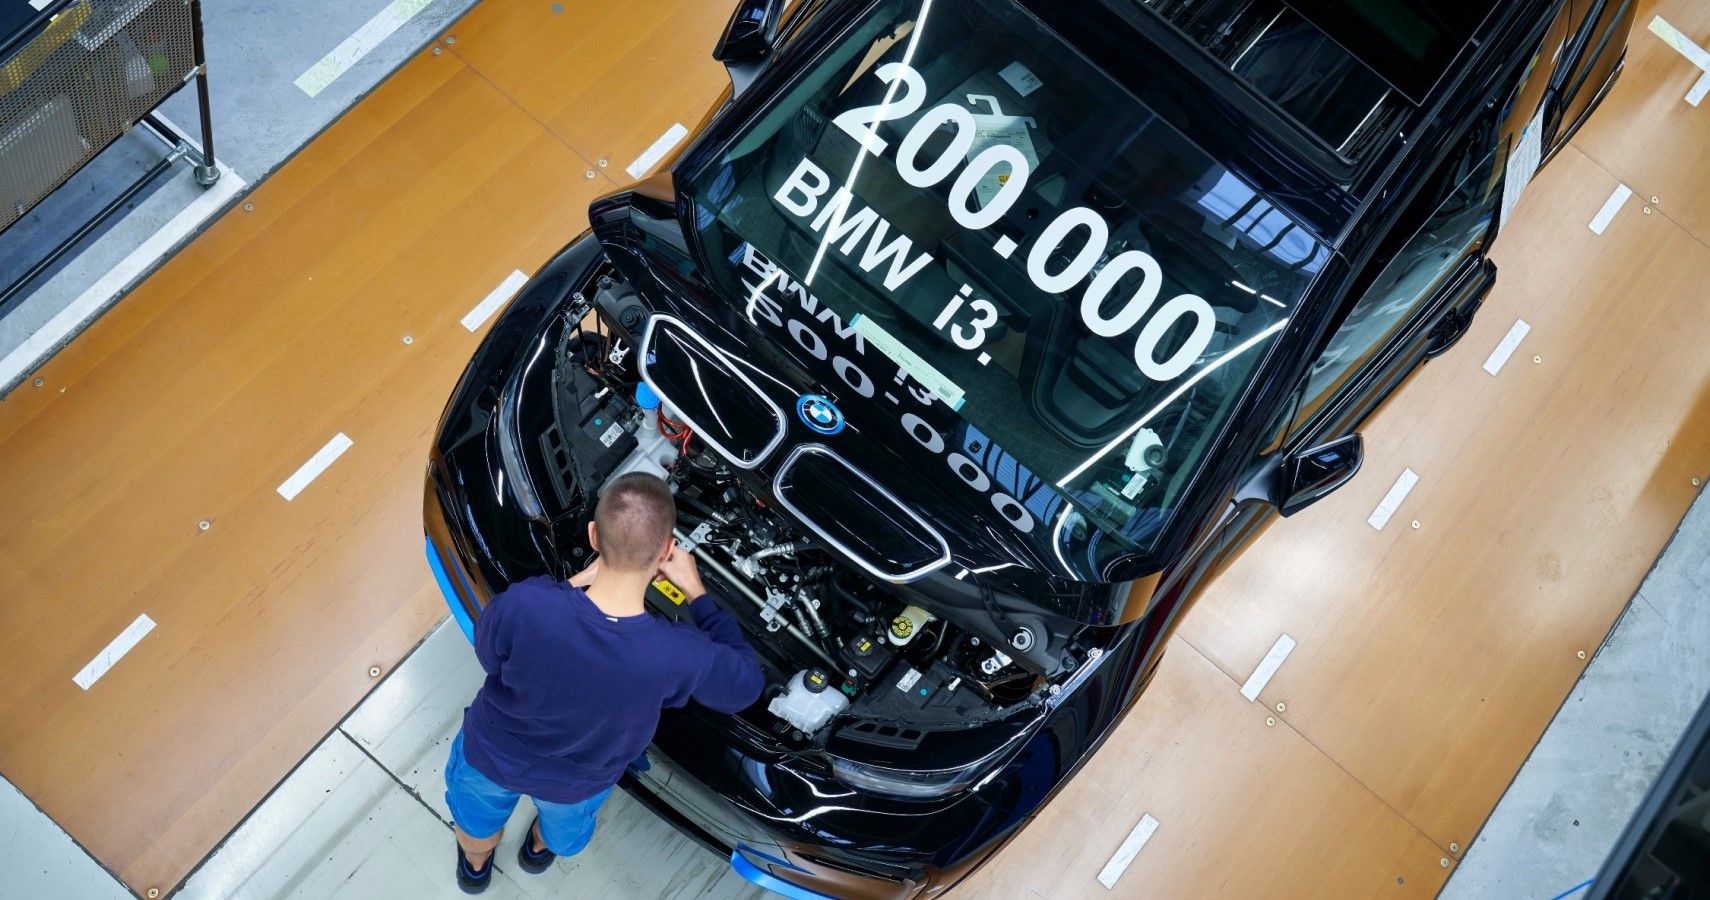 BMW reached the milestone of 200,000 units in november 2021